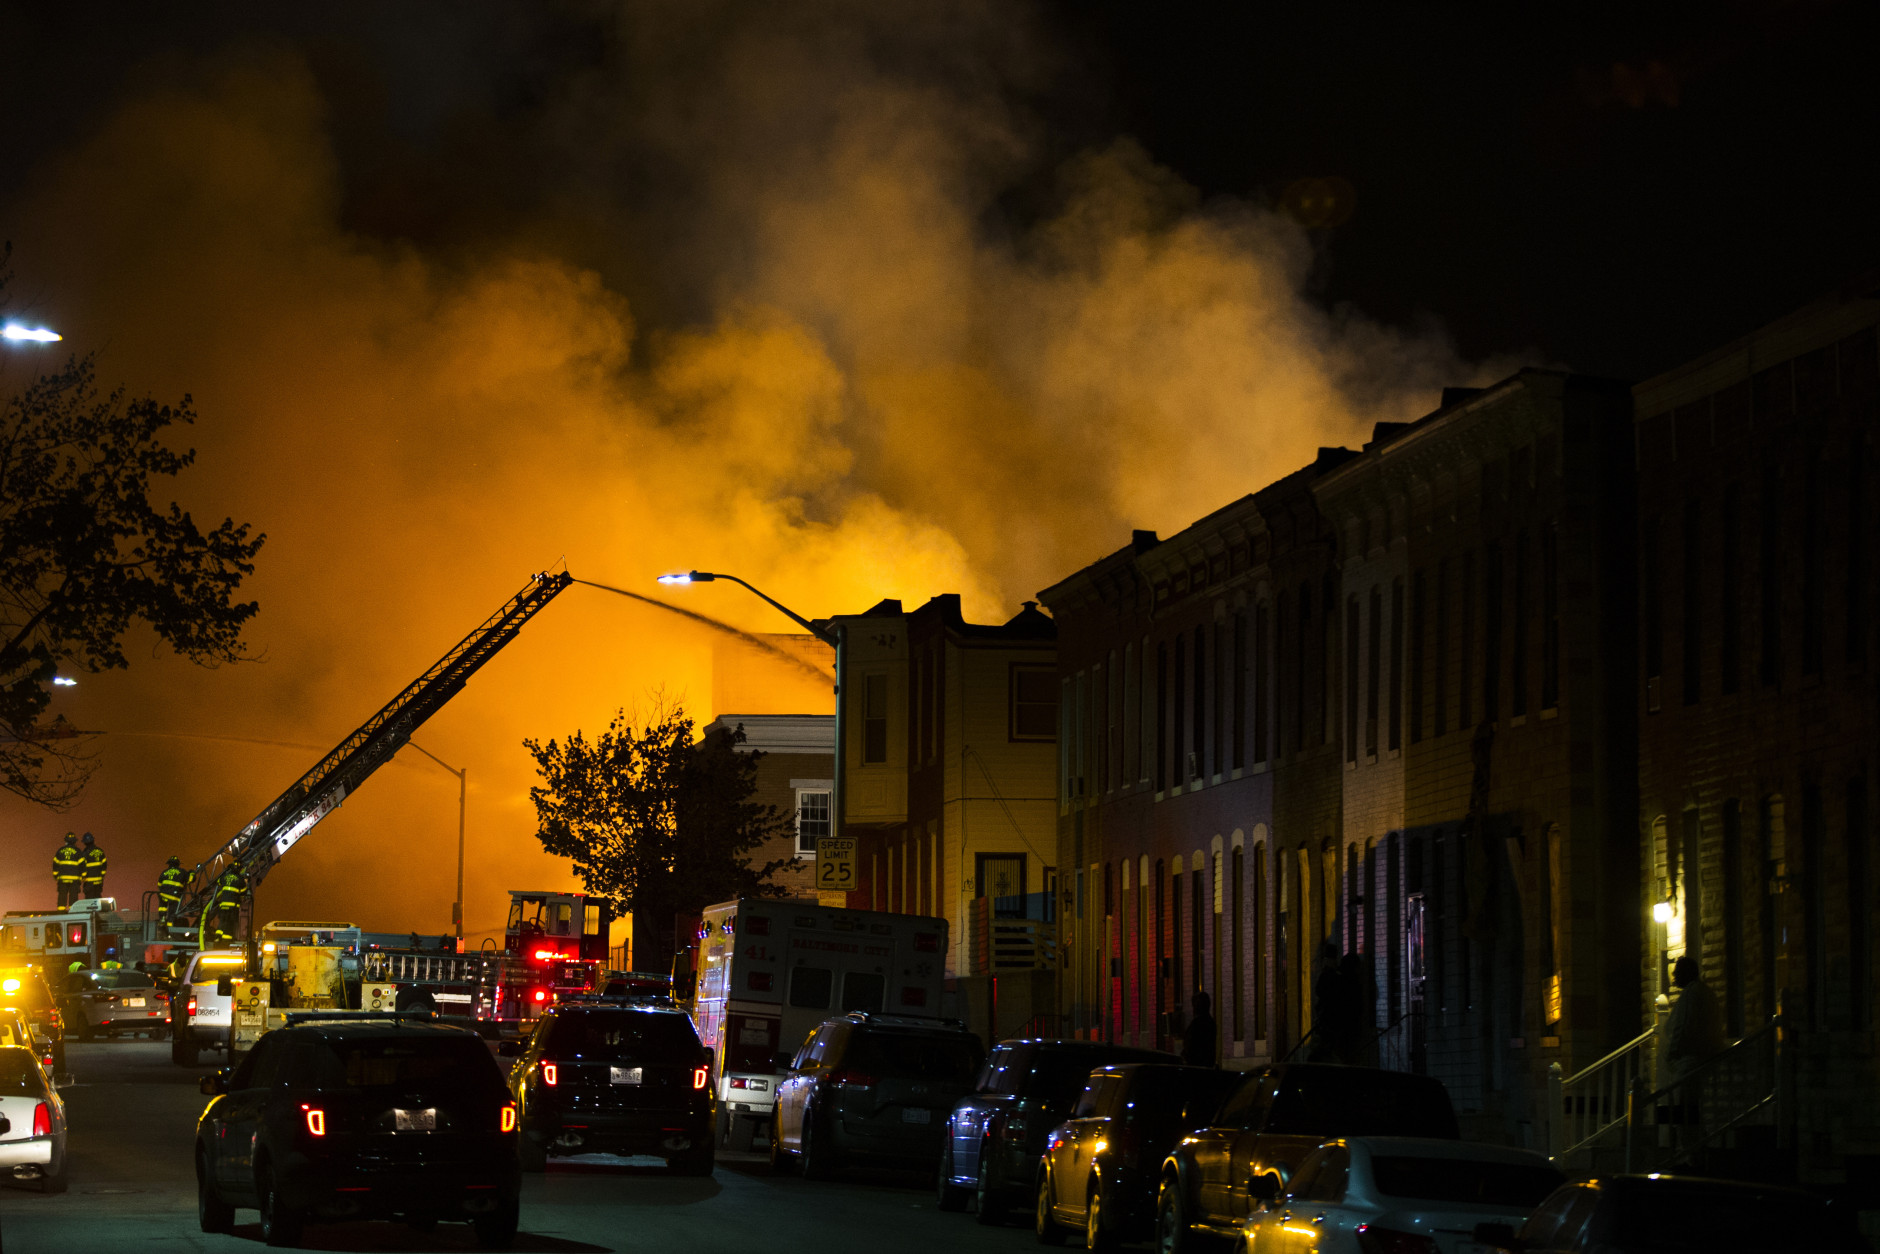 Firefighters battle a blaze, Monday, April 27, 2015, after rioters plunged part of Baltimore into chaos, torching a pharmacy, setting police cars ablaze and throwing bricks at officers. (AP Photo/Evan Vucci)